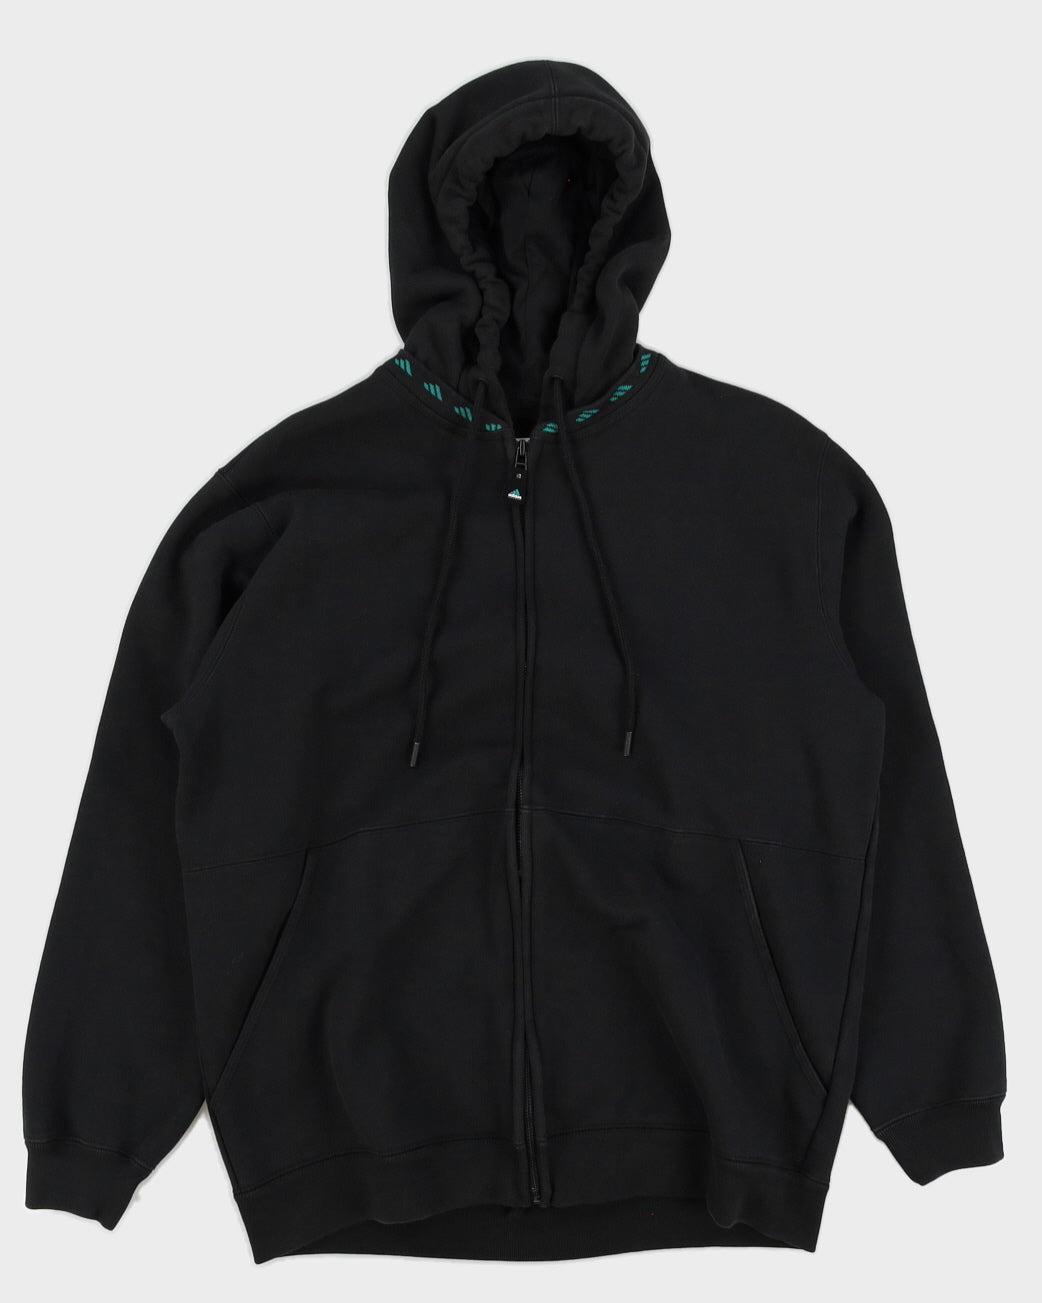 Adidas Equipment Collection Black Repro Hoodie - L